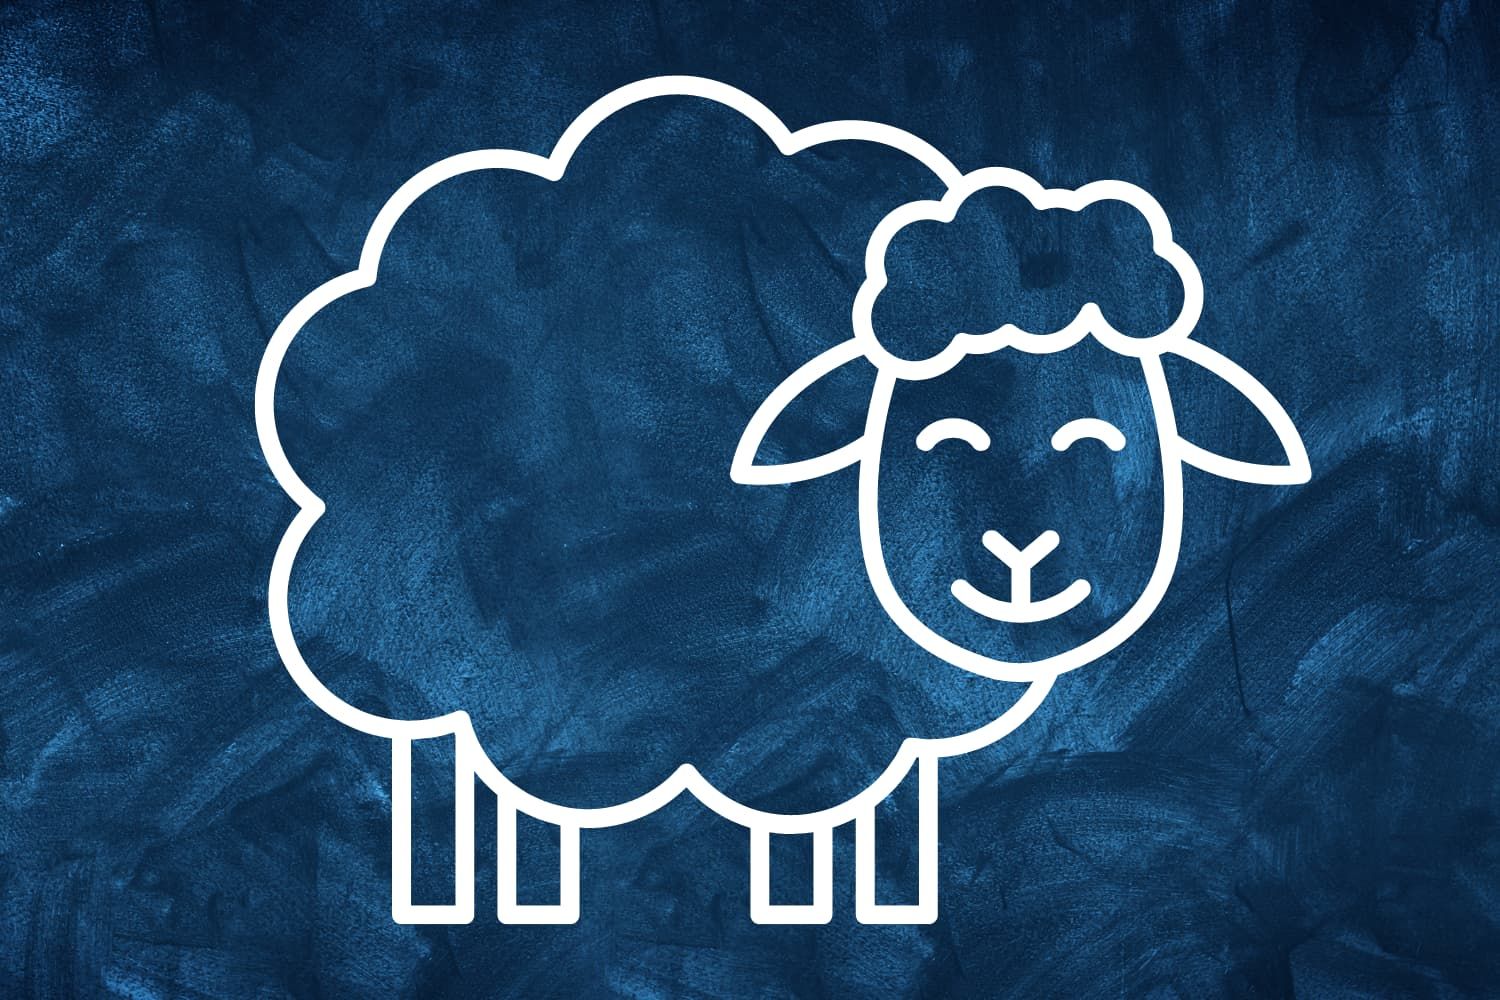 Craft%20-%20NT%20Parable%20of%20the%20lost%20sheep%20-%20Create%20a%20sheep-ea90aa6b Helping / being helpful